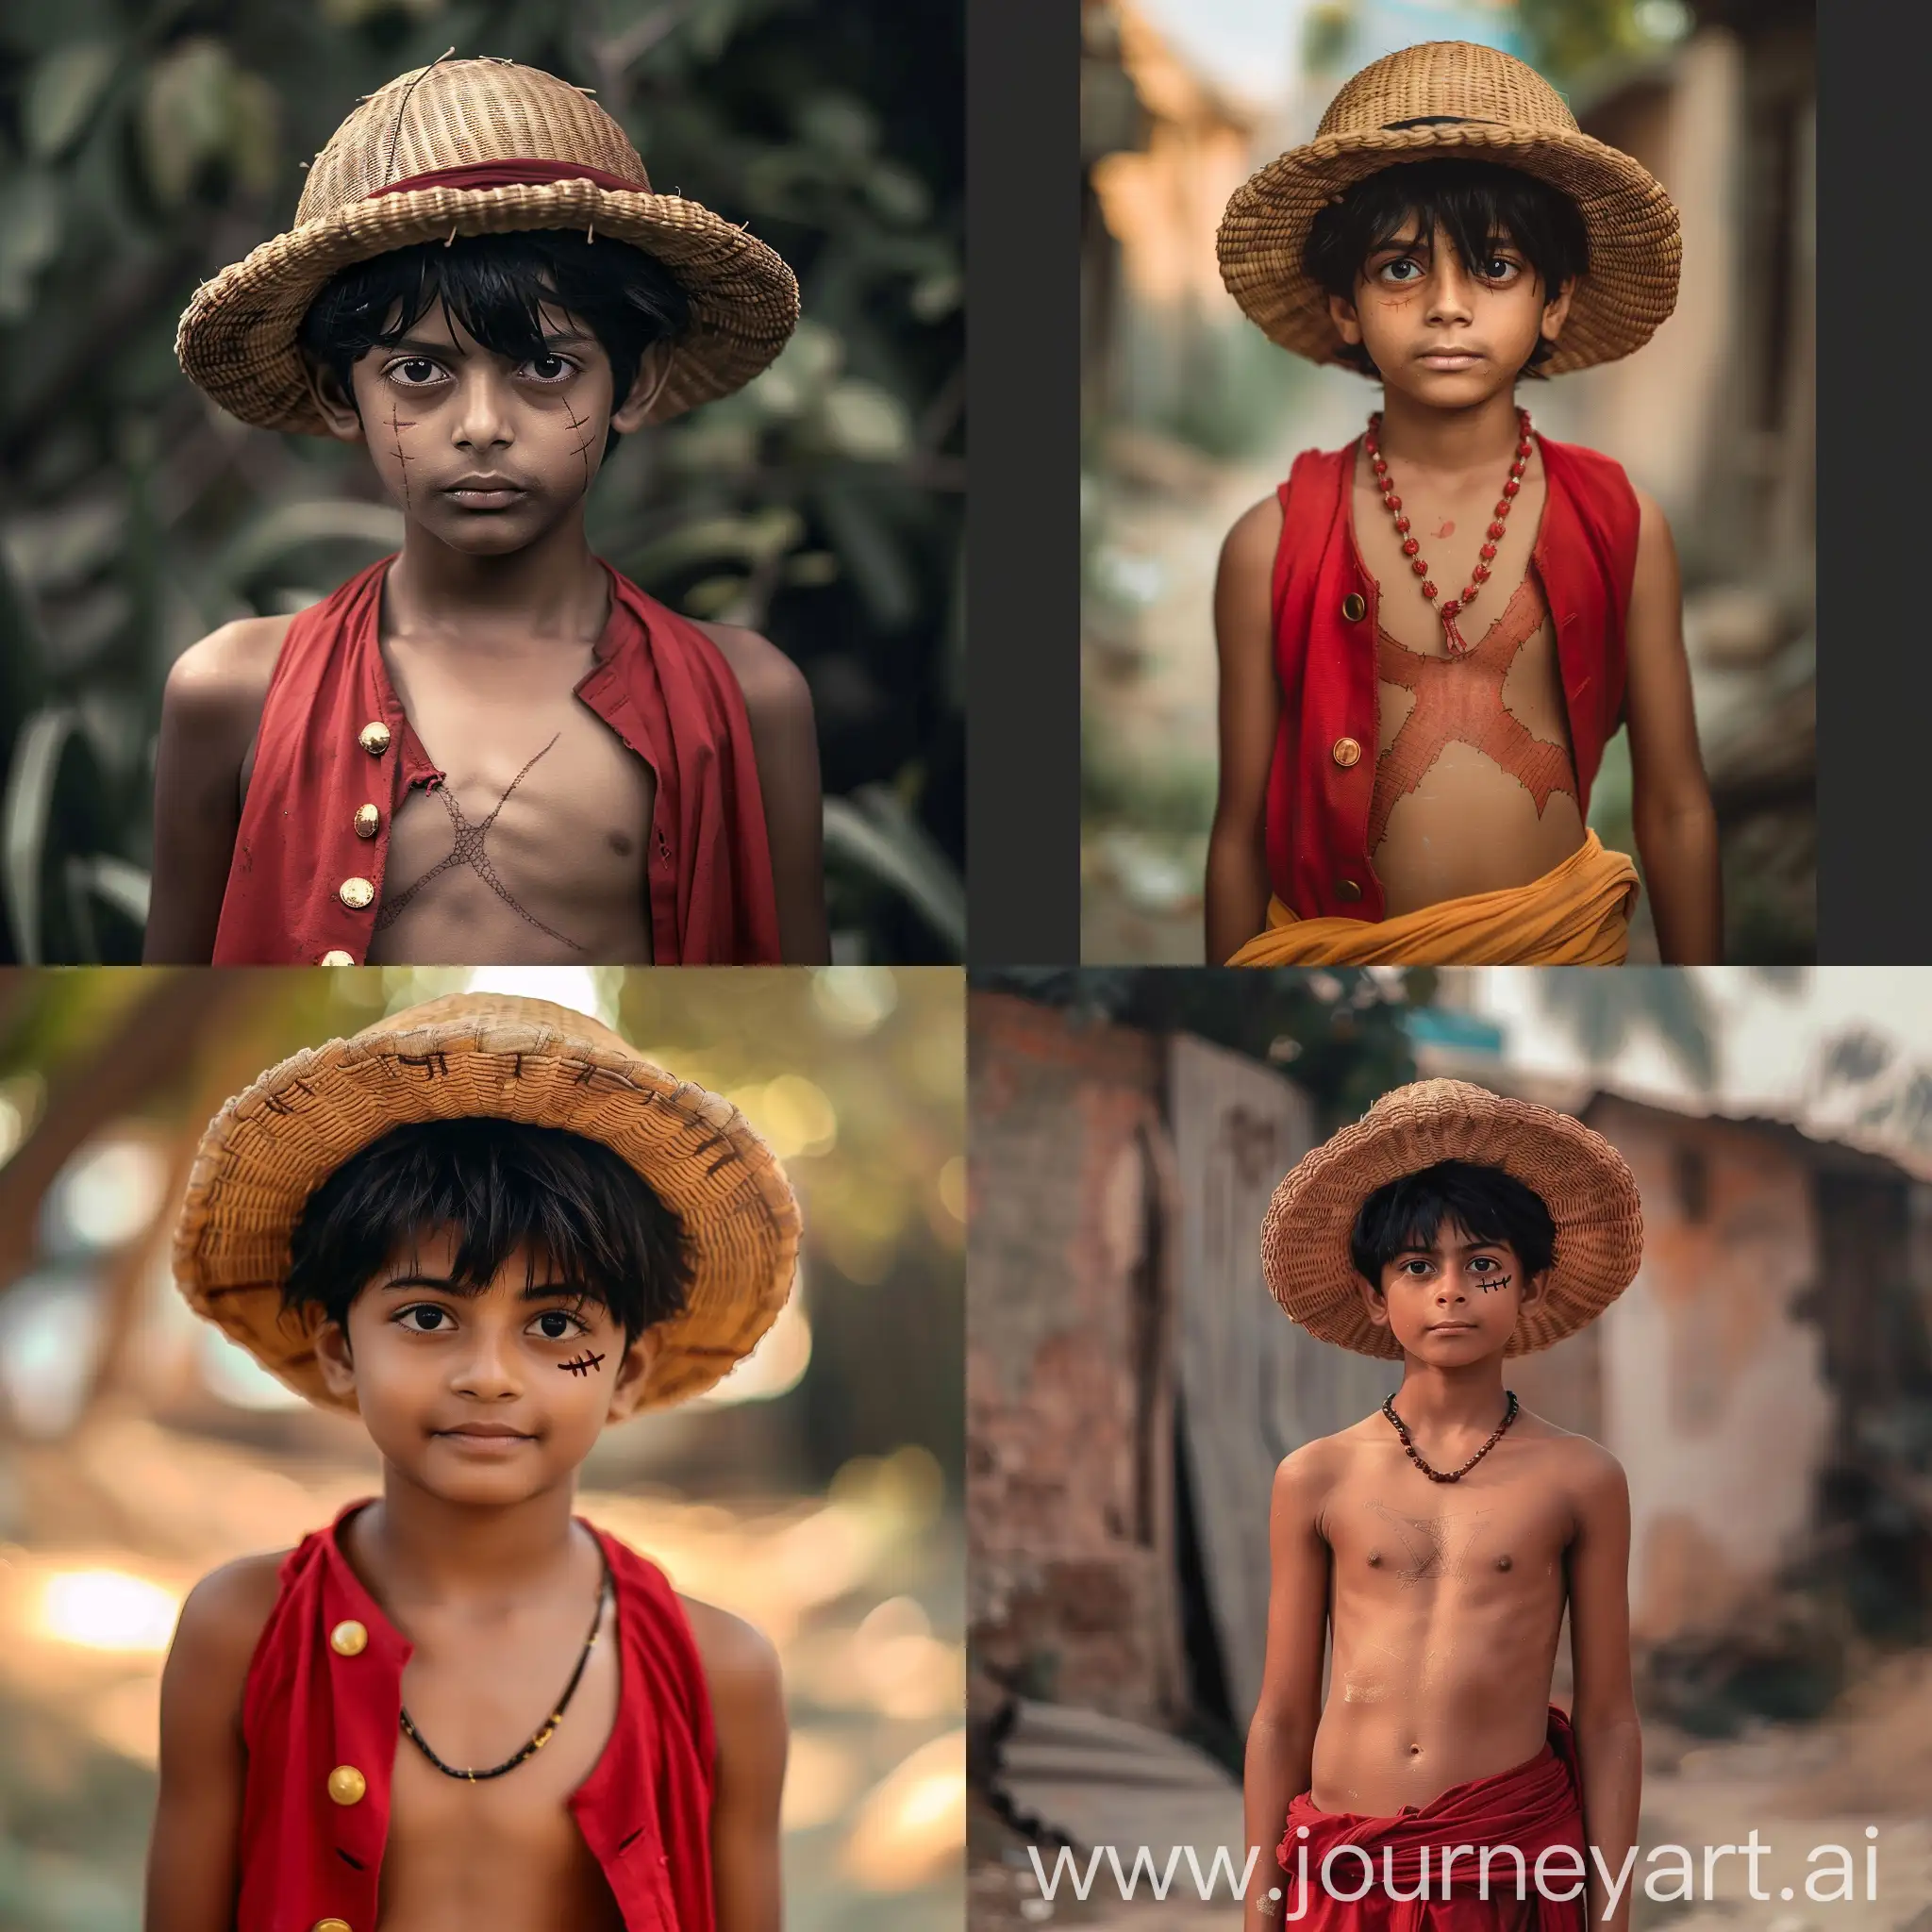 15 years old indian boy as Monkey D. Luffy, realistic, indian boy, luffy style, live, real